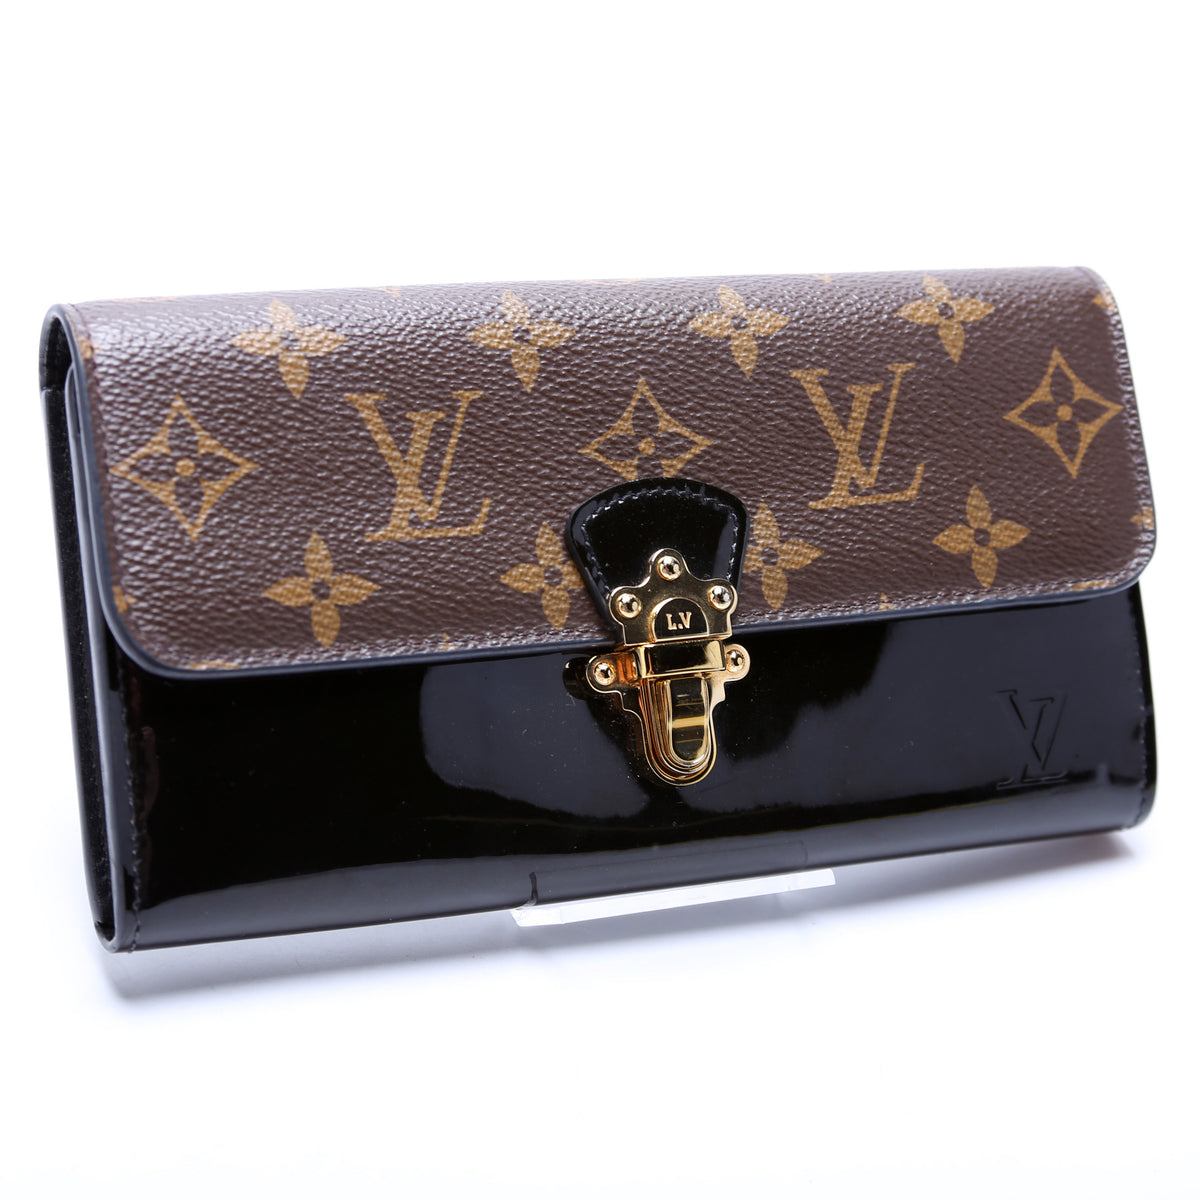 Cherrywood patent leather crossbody bag Louis Vuitton Black in